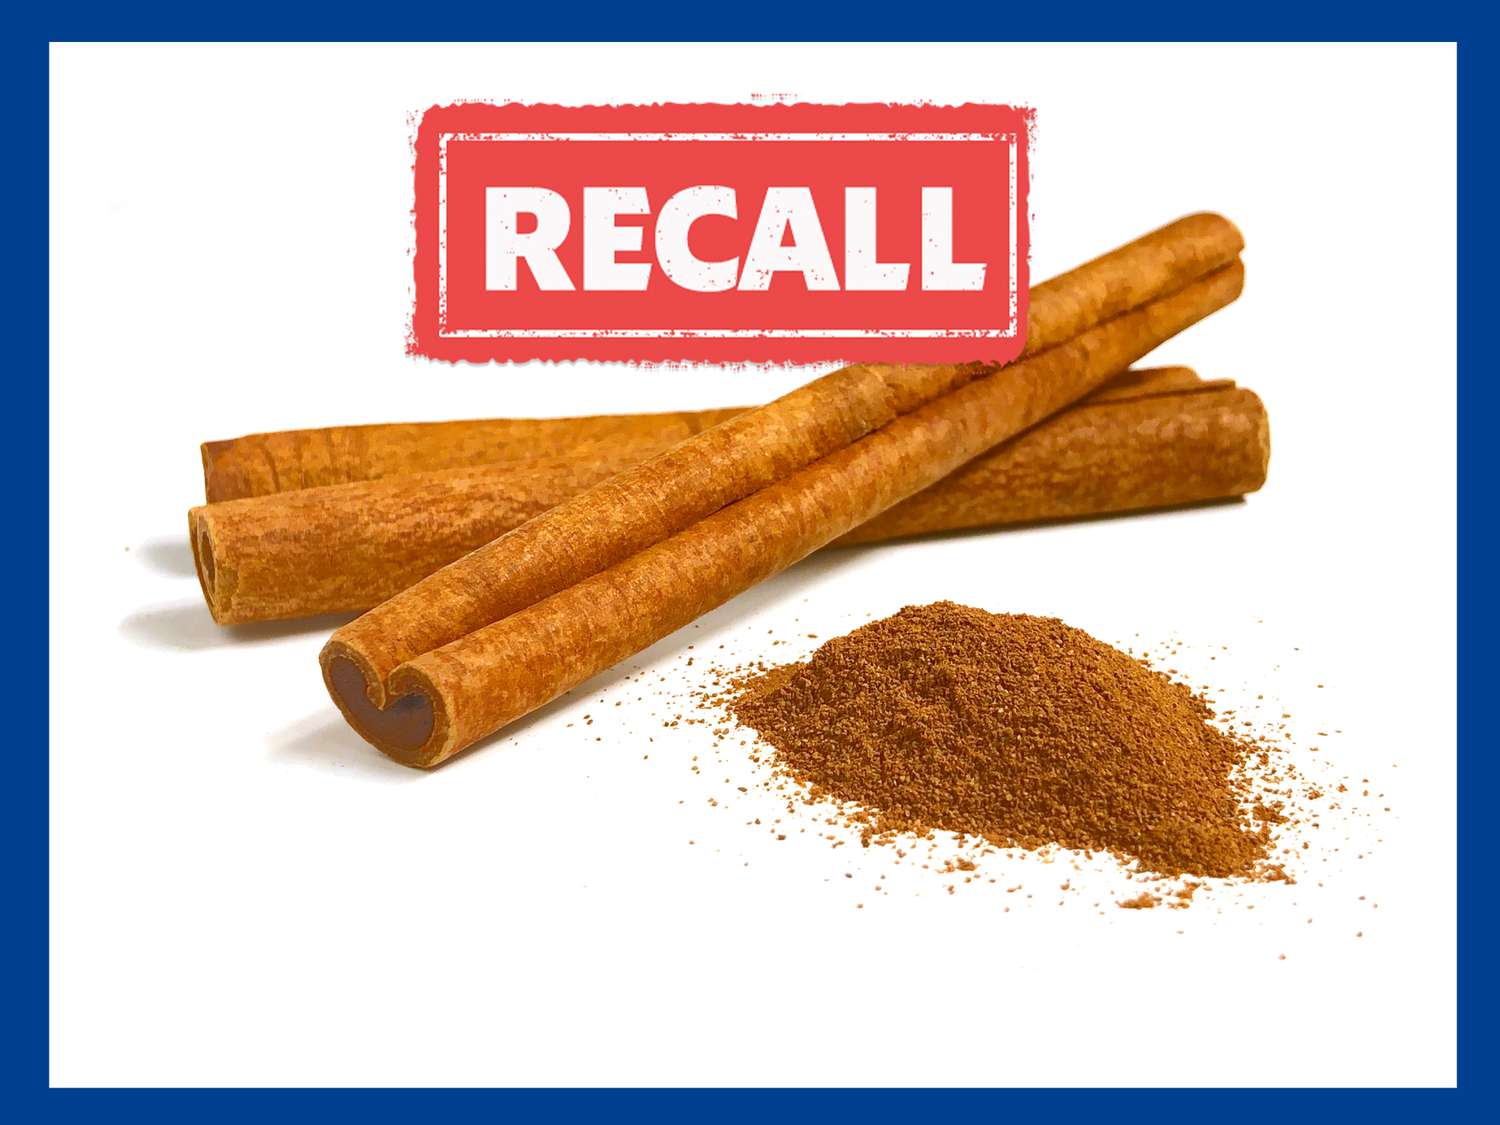 Urgent Spice Alert: Why Your Kitchen’s Cinnamon Might Be Dangerous for Your Family’s Health